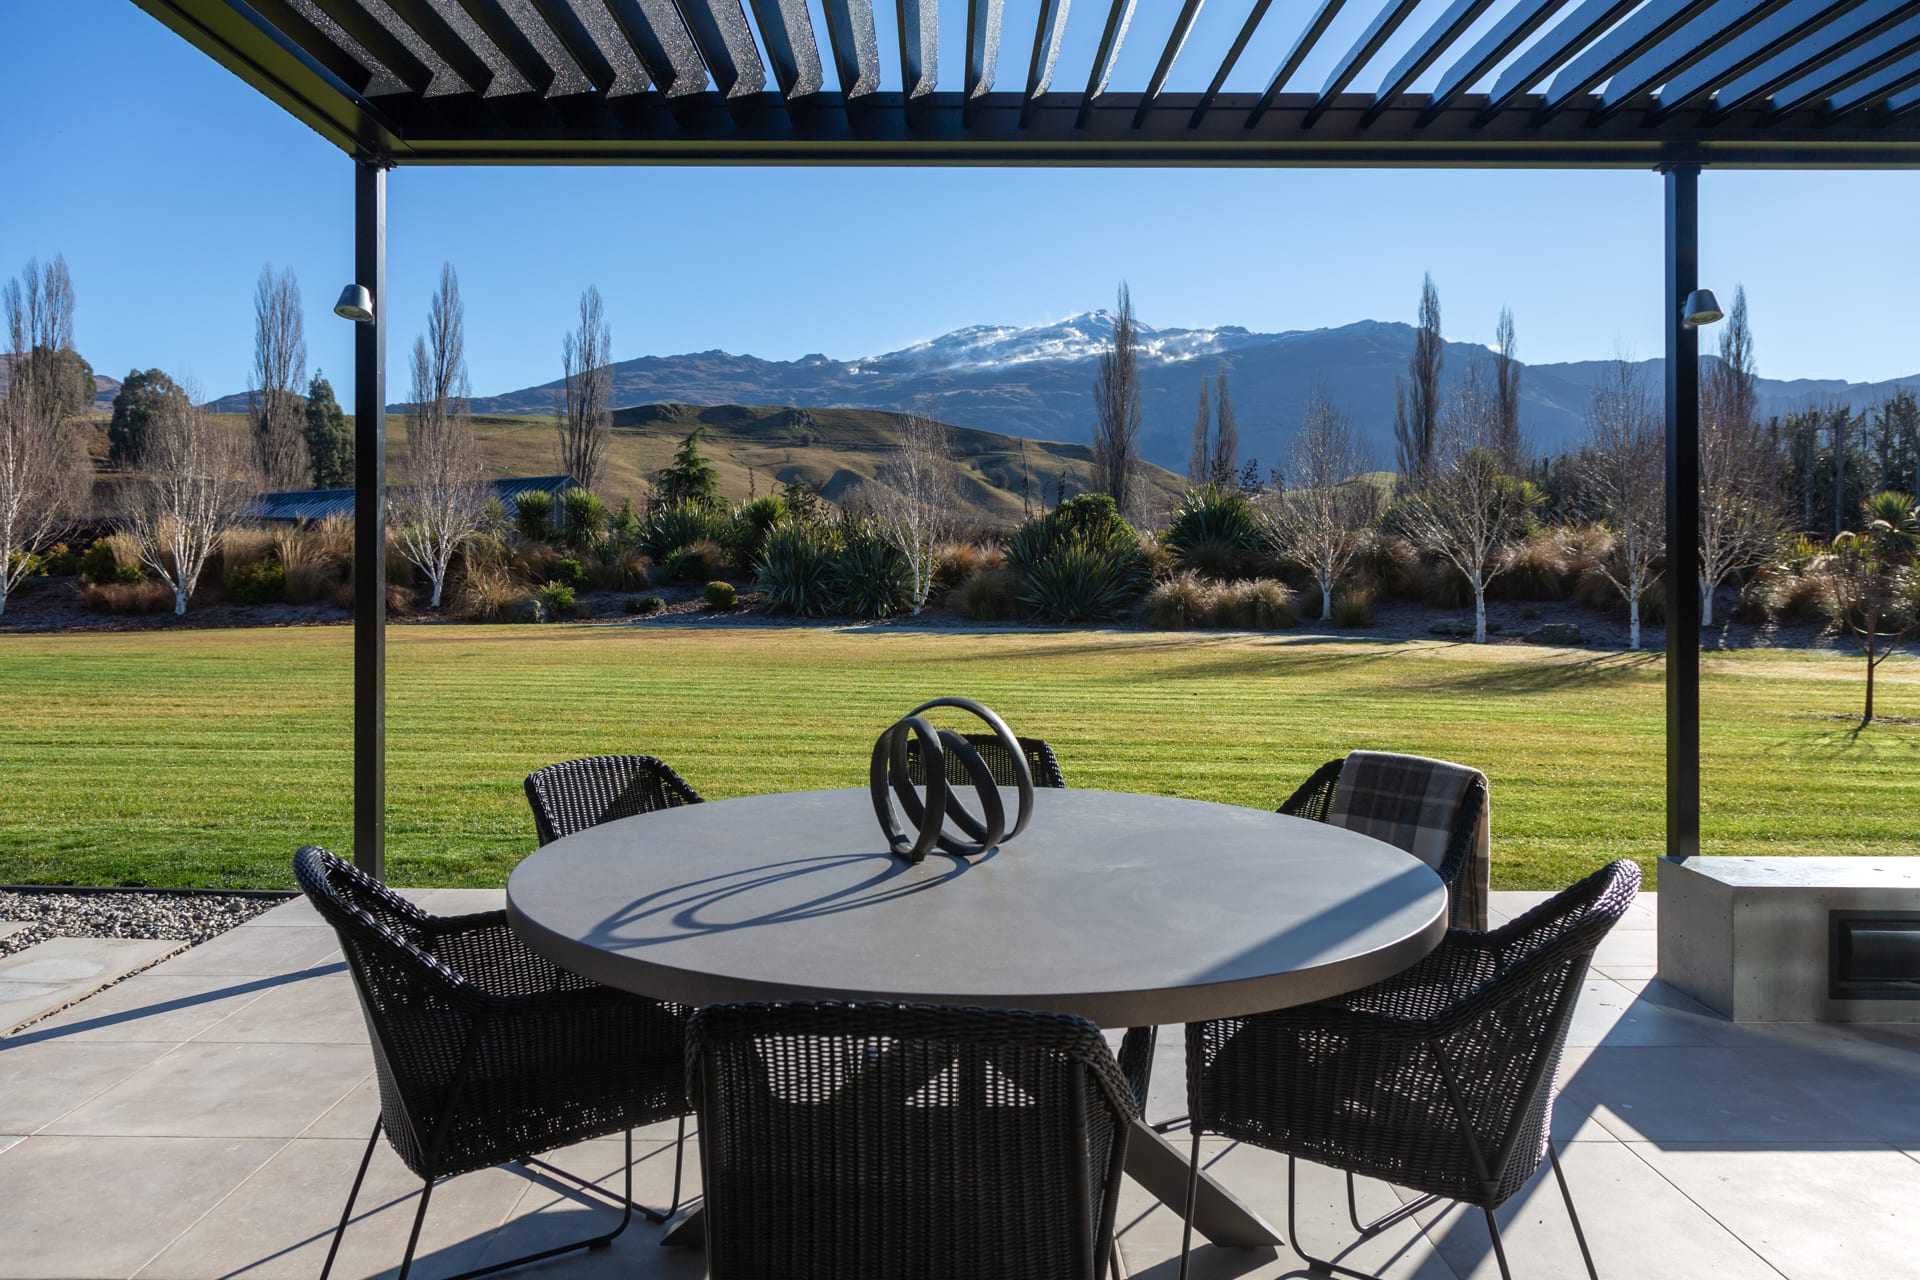 Outdoor dining with stunning mountain views